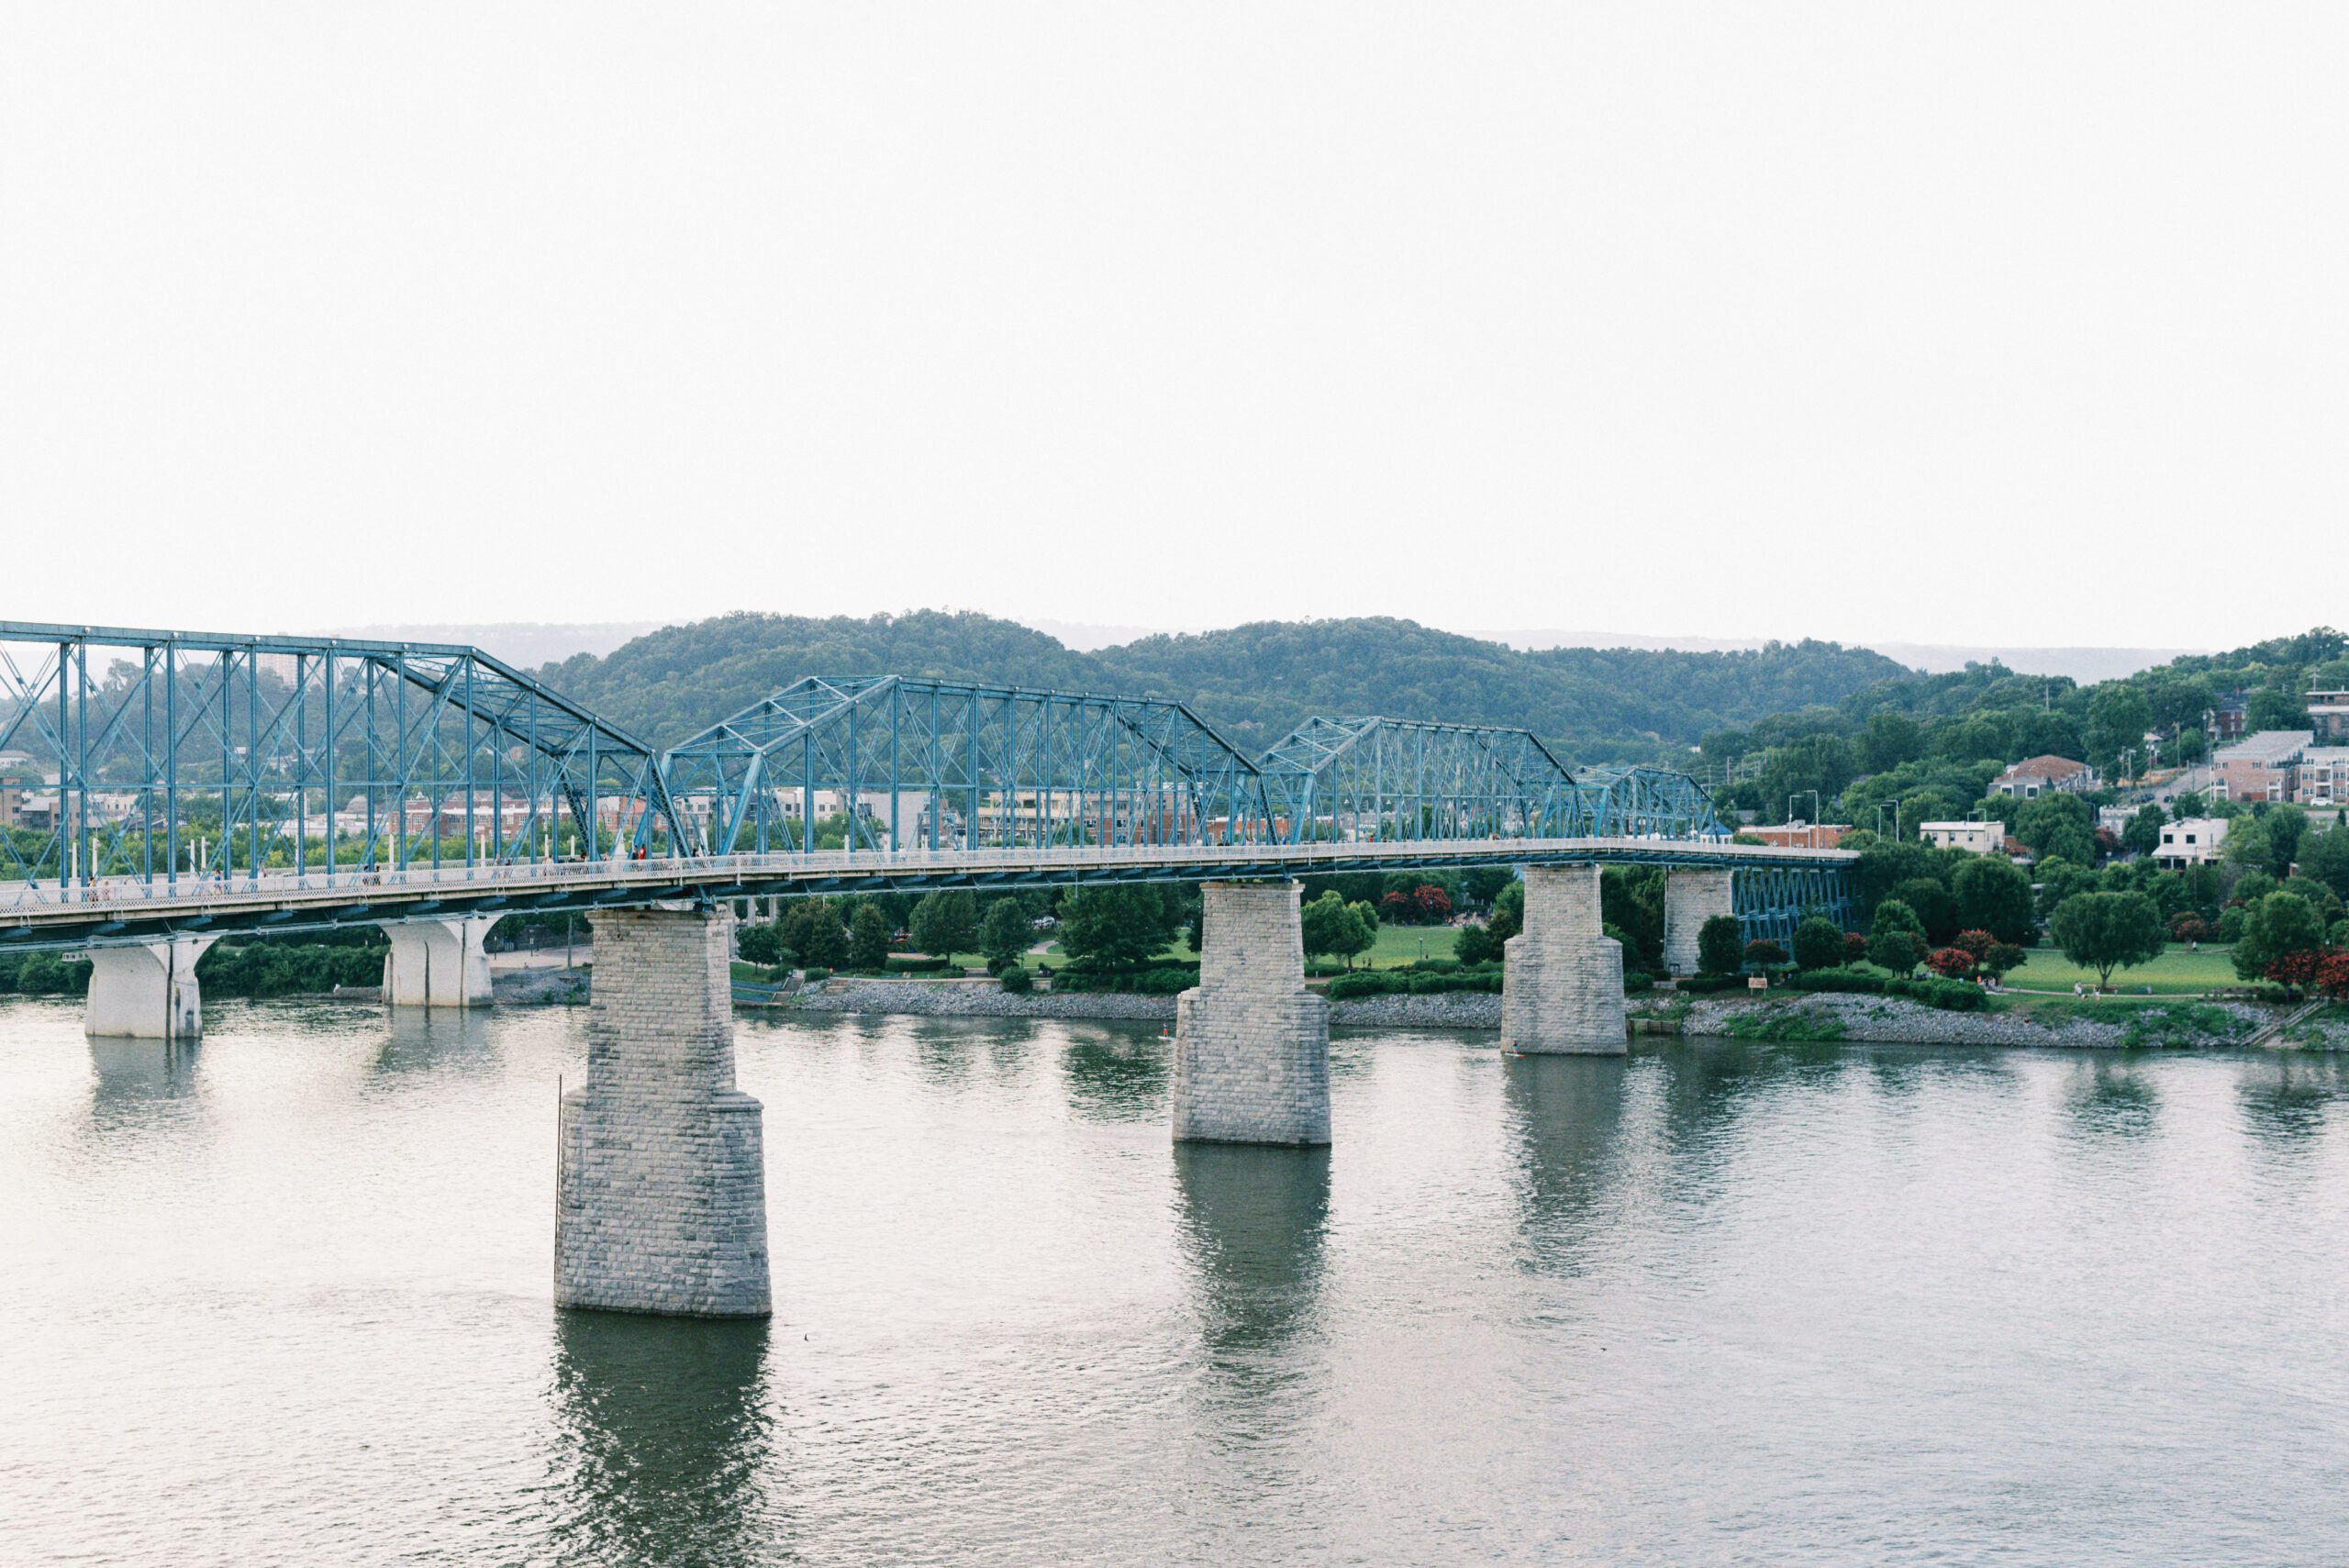 The view of Walnut Street Bridge at the Hunter Museum of American Art in Chattanooga, Tennessee by Chattanooga wedding photographer, Kelsey Dawn Photography